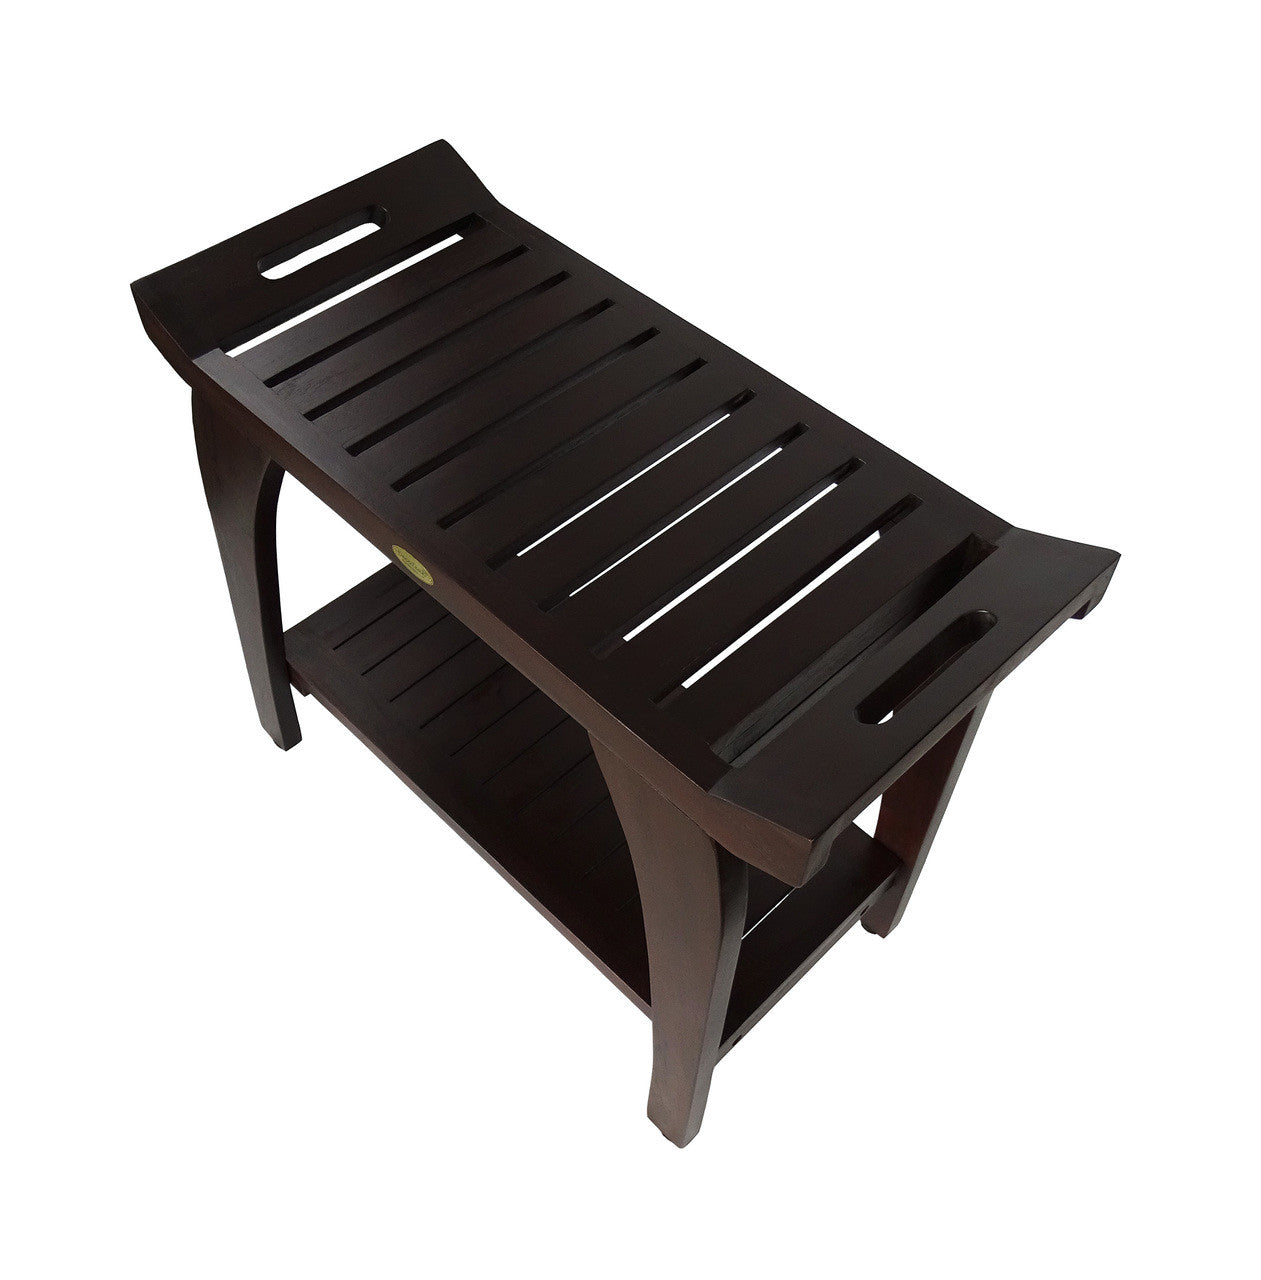 DecoTeak® Tranquility® 30"L Teak Wood Shower Bench with Shelf and LiftAide® Arms in Woodland Brown Finish